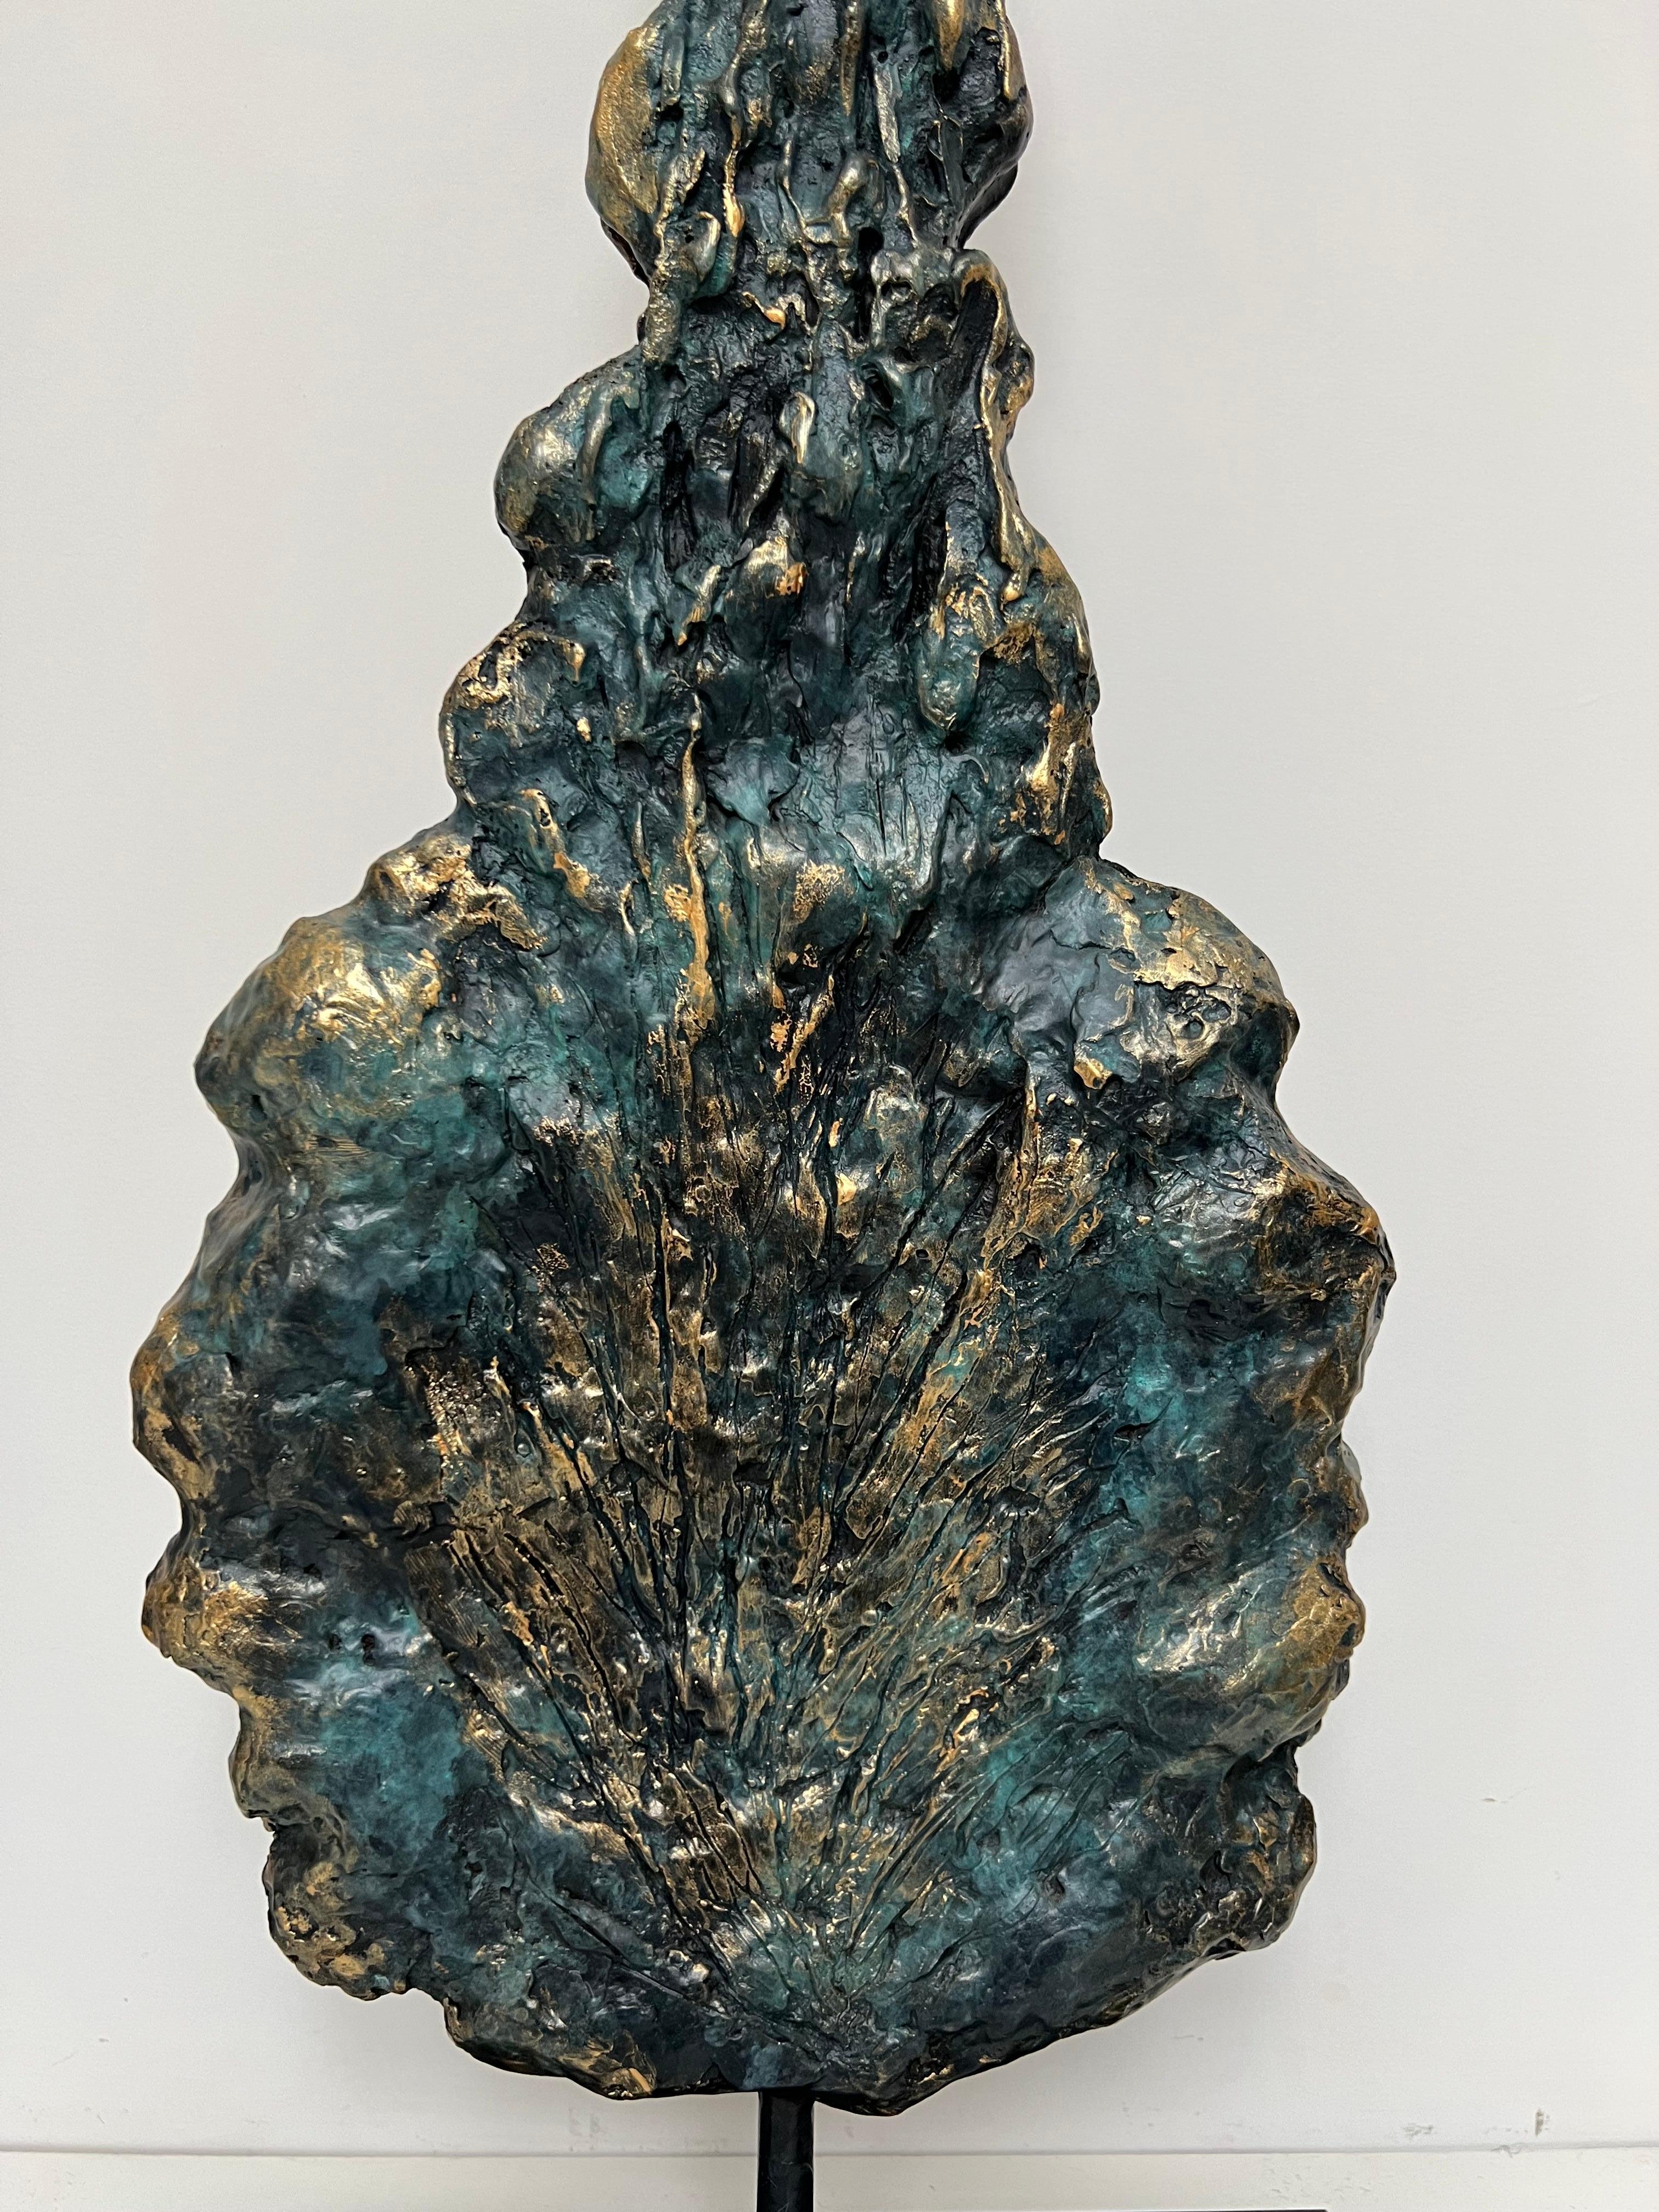 One of a kind sculptures of pine trees set, hand crafted, moulded and cast in bronze.
Inspired by the tall pine trees lining the soft hills of the Mediterranean landscape, this Jewell pair of substantial sculptures is intricately crafted, moulded